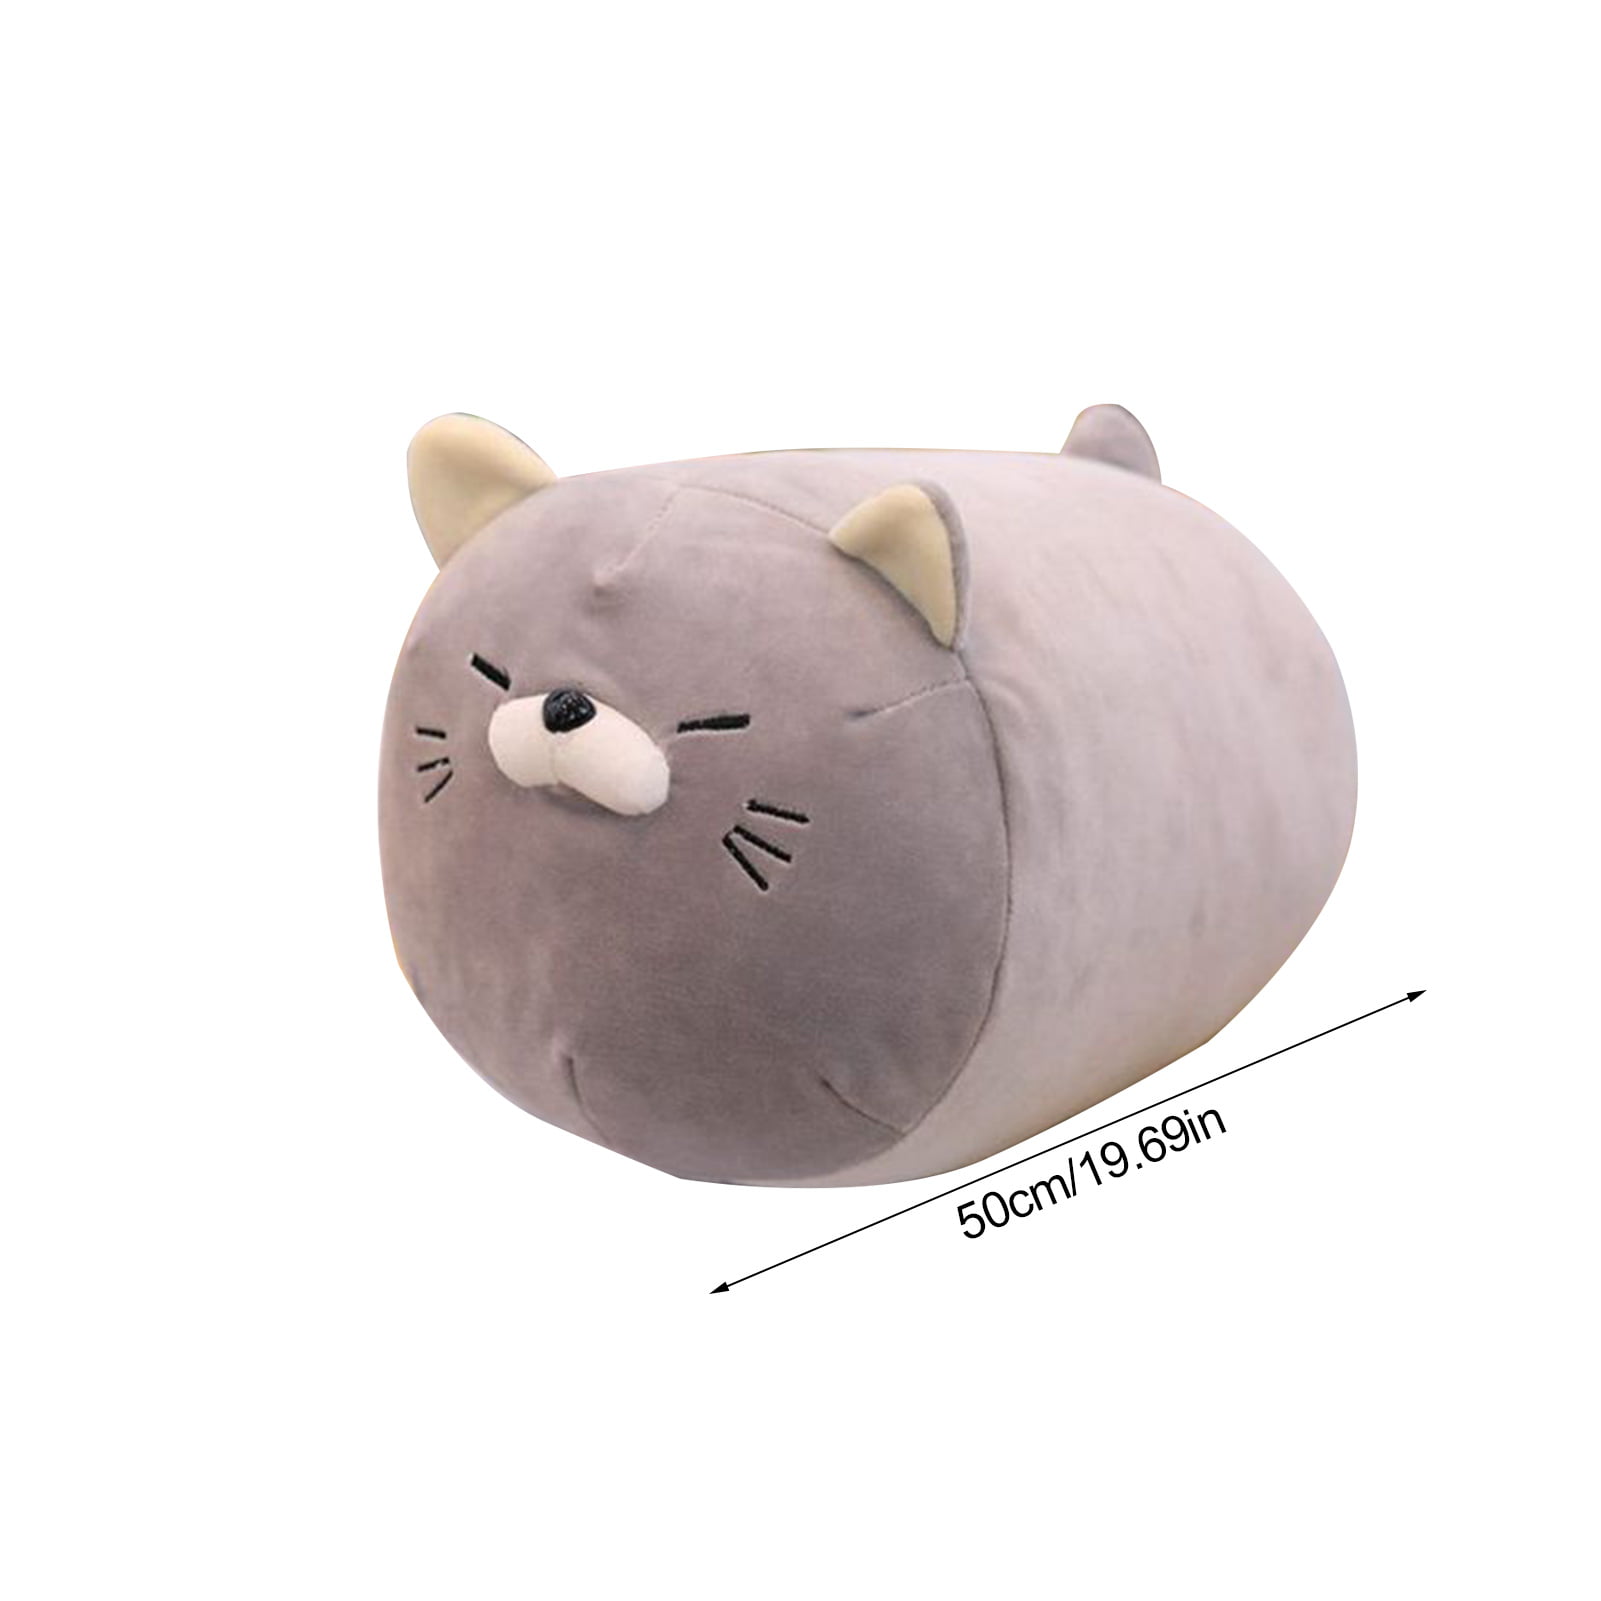 Details about   For Kids cushion Toy Soft Cute Plush Cat Cats Doll Stuffed Kitten Pillow Gift 